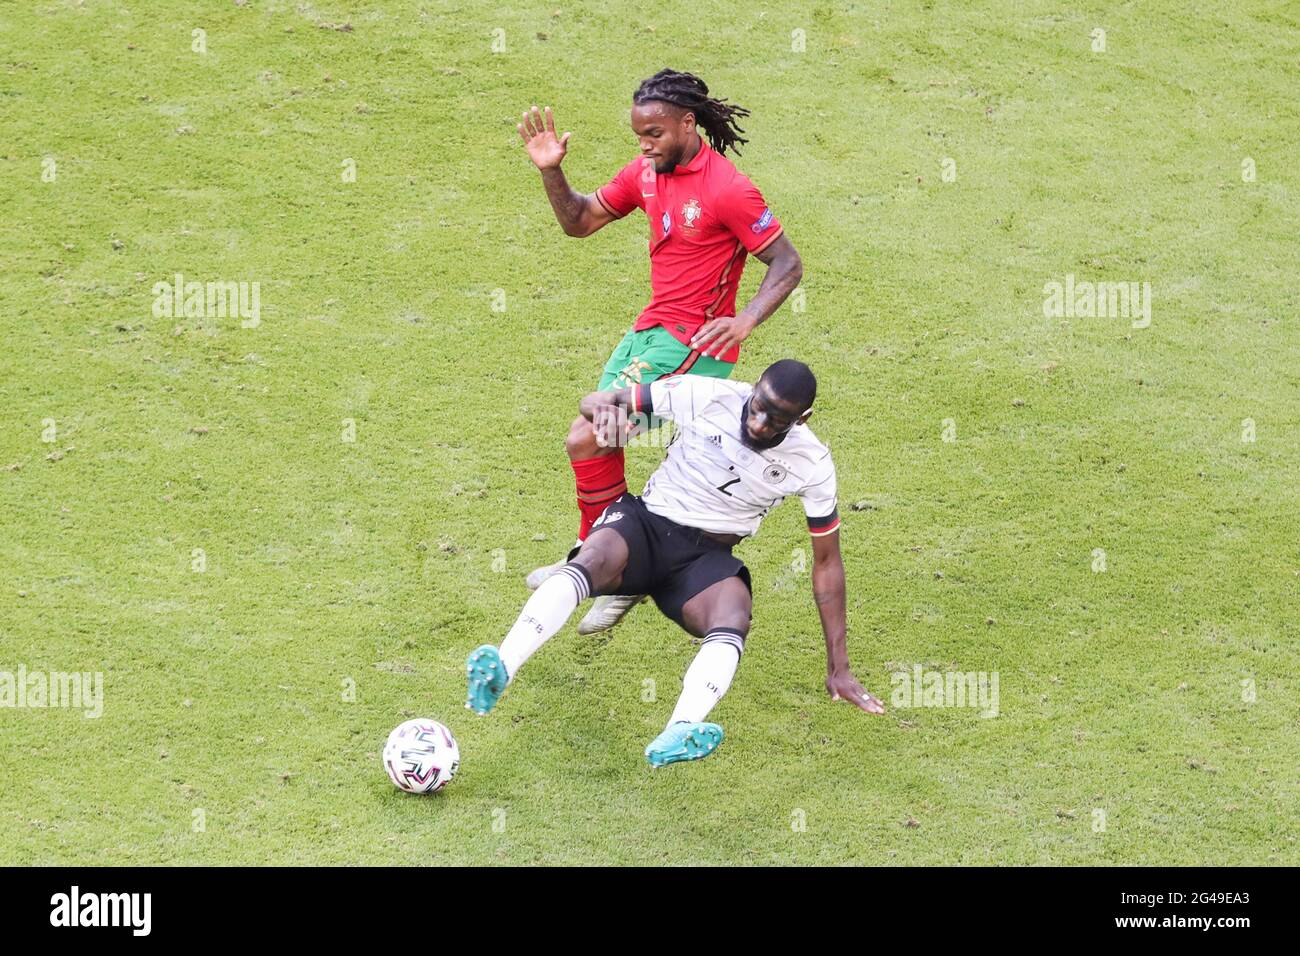 Munich, Germany. 19th June, 2021. Renato Sanches (top) of Portugal vies with Antonio Ruediger of Germany during the UEFA Euro 2020 Championship Group F match in Munich, Germany, June 19, 2021. Credit: Shan Yuqi/Xinhua/Alamy Live News Stock Photo